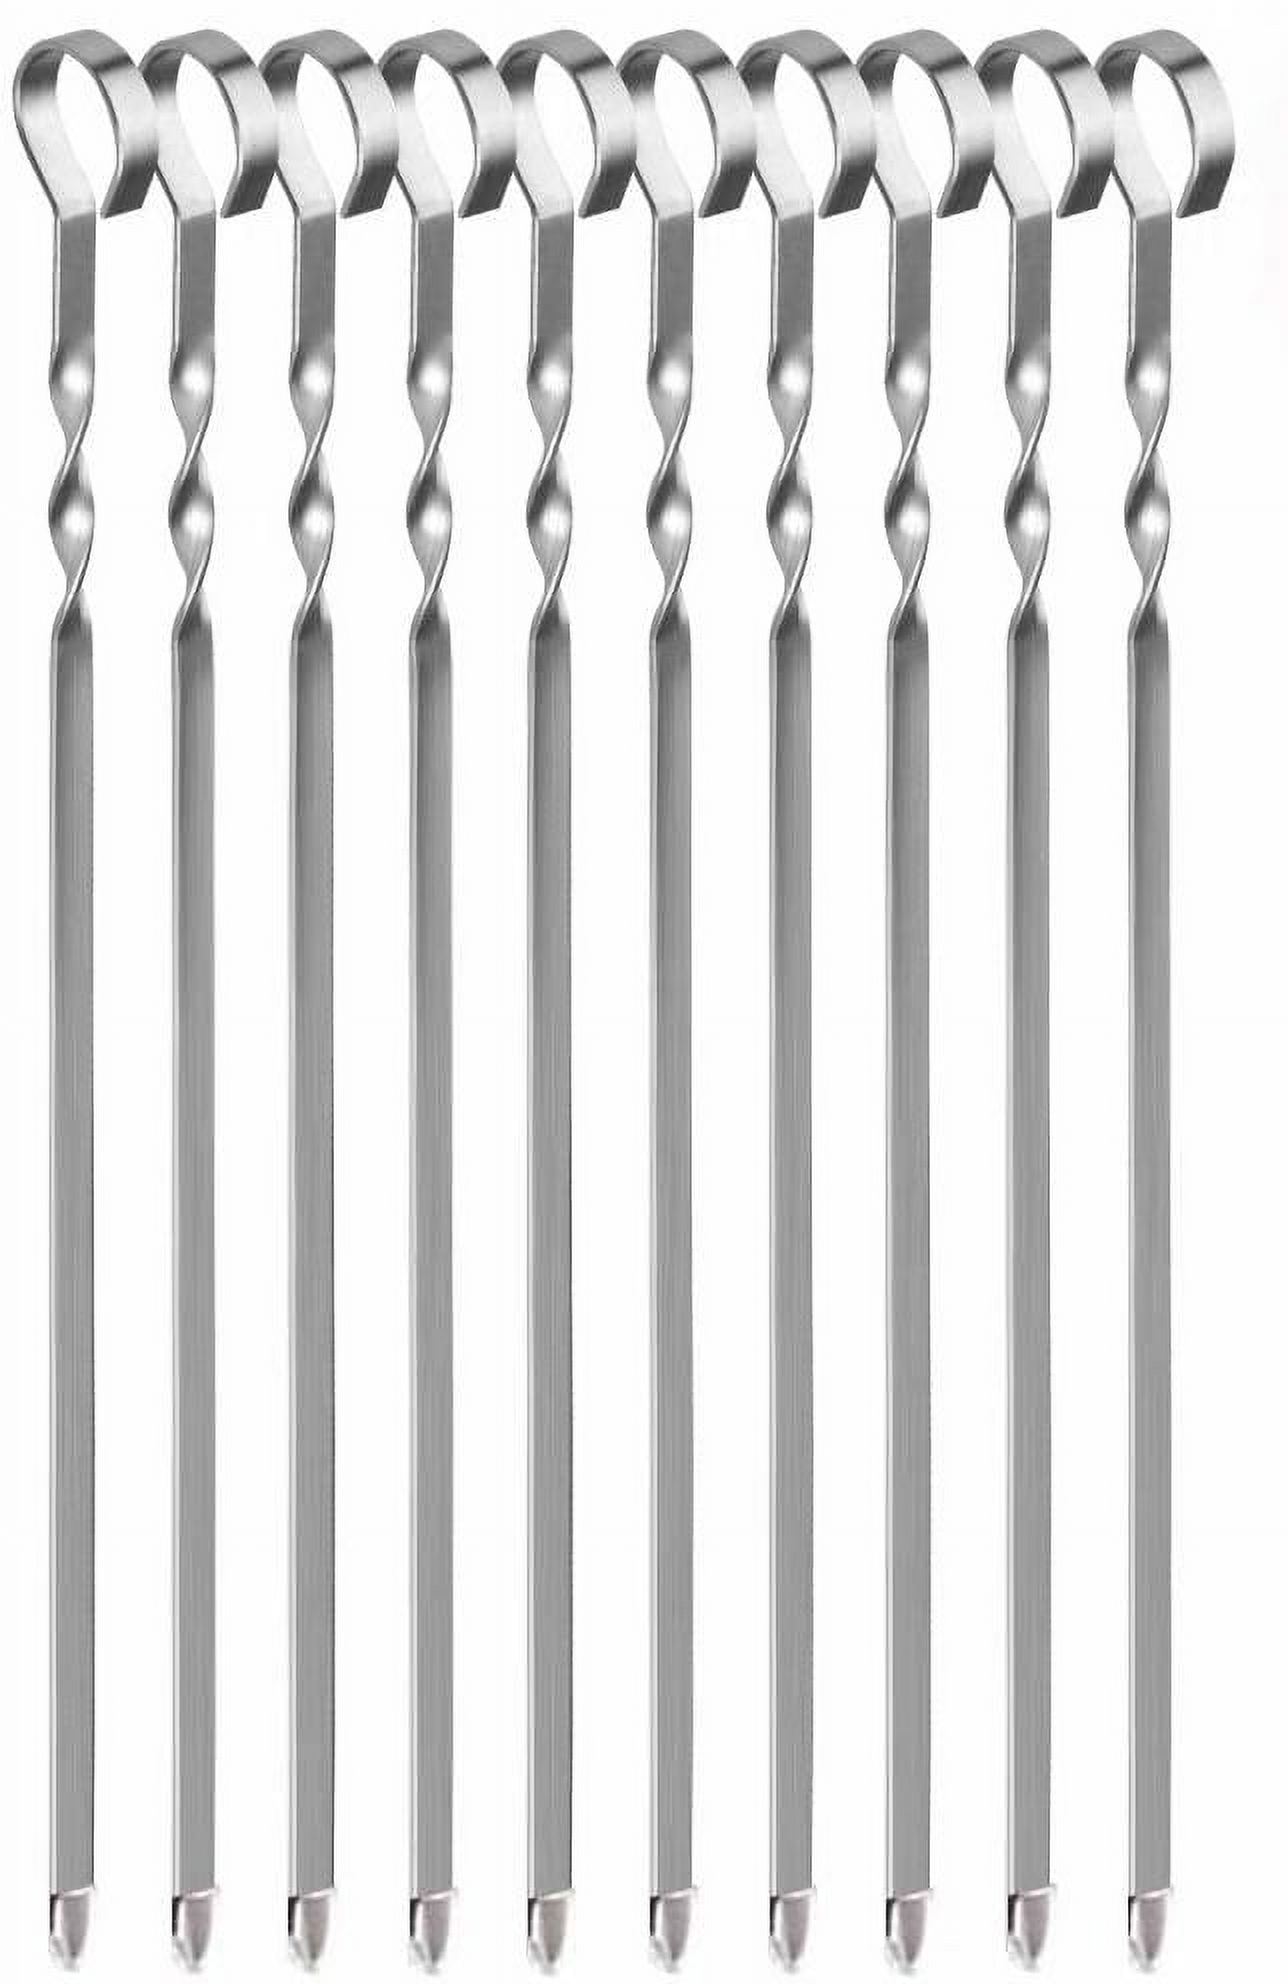 Artrylin Kabob Skewers (Set of 10), Stainless Steel BBQ Barbecue Skewers Set - 15" Flat Metal Skewers for Grilling - Reusable BBQ Sticks with Portable Storage Bag (15" skewers(10 Pack)) - image 1 of 5